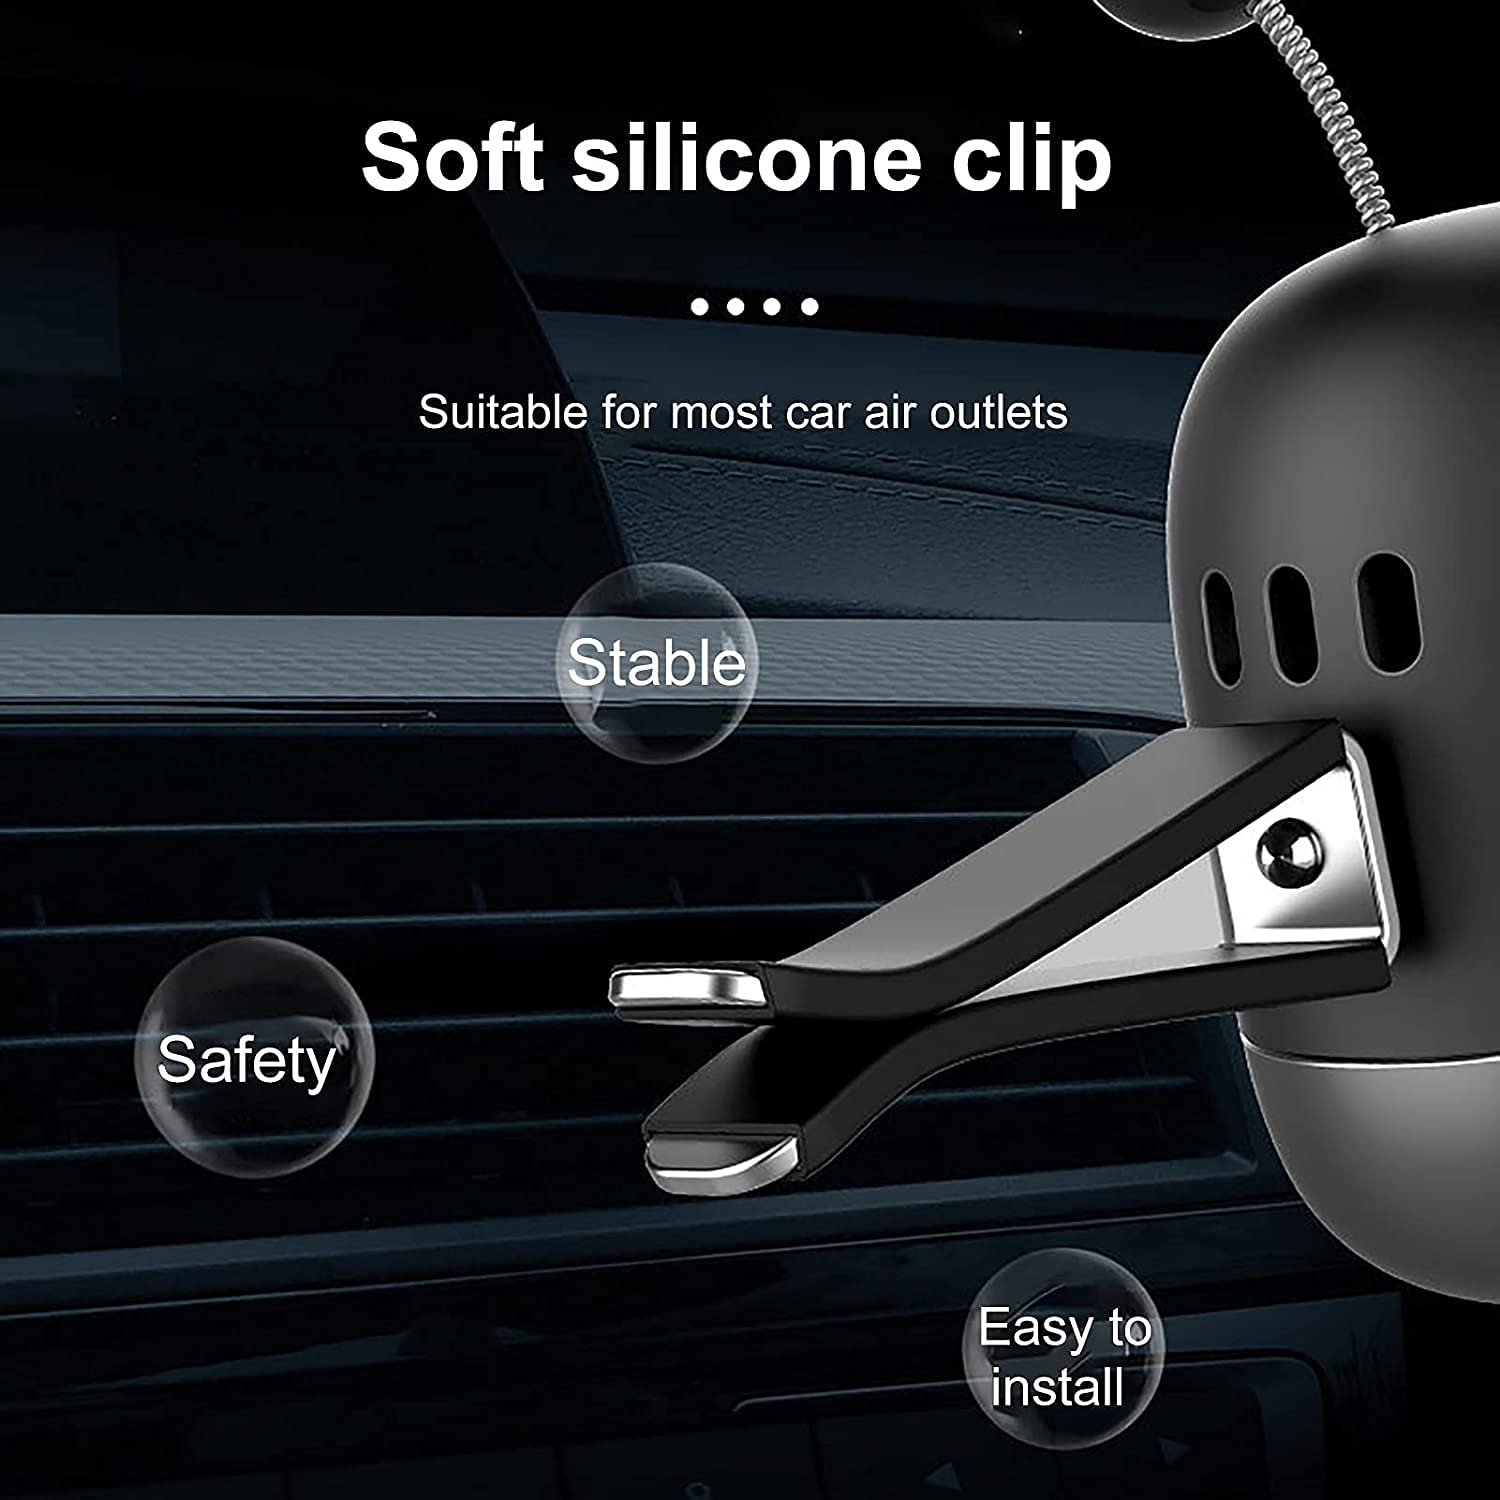 Car Vent Car Air Freshener Robot style with Clip Swing Tentacle car perfume Universal for cars (1 Fragrance Tablets, Black/SIlver) Image 